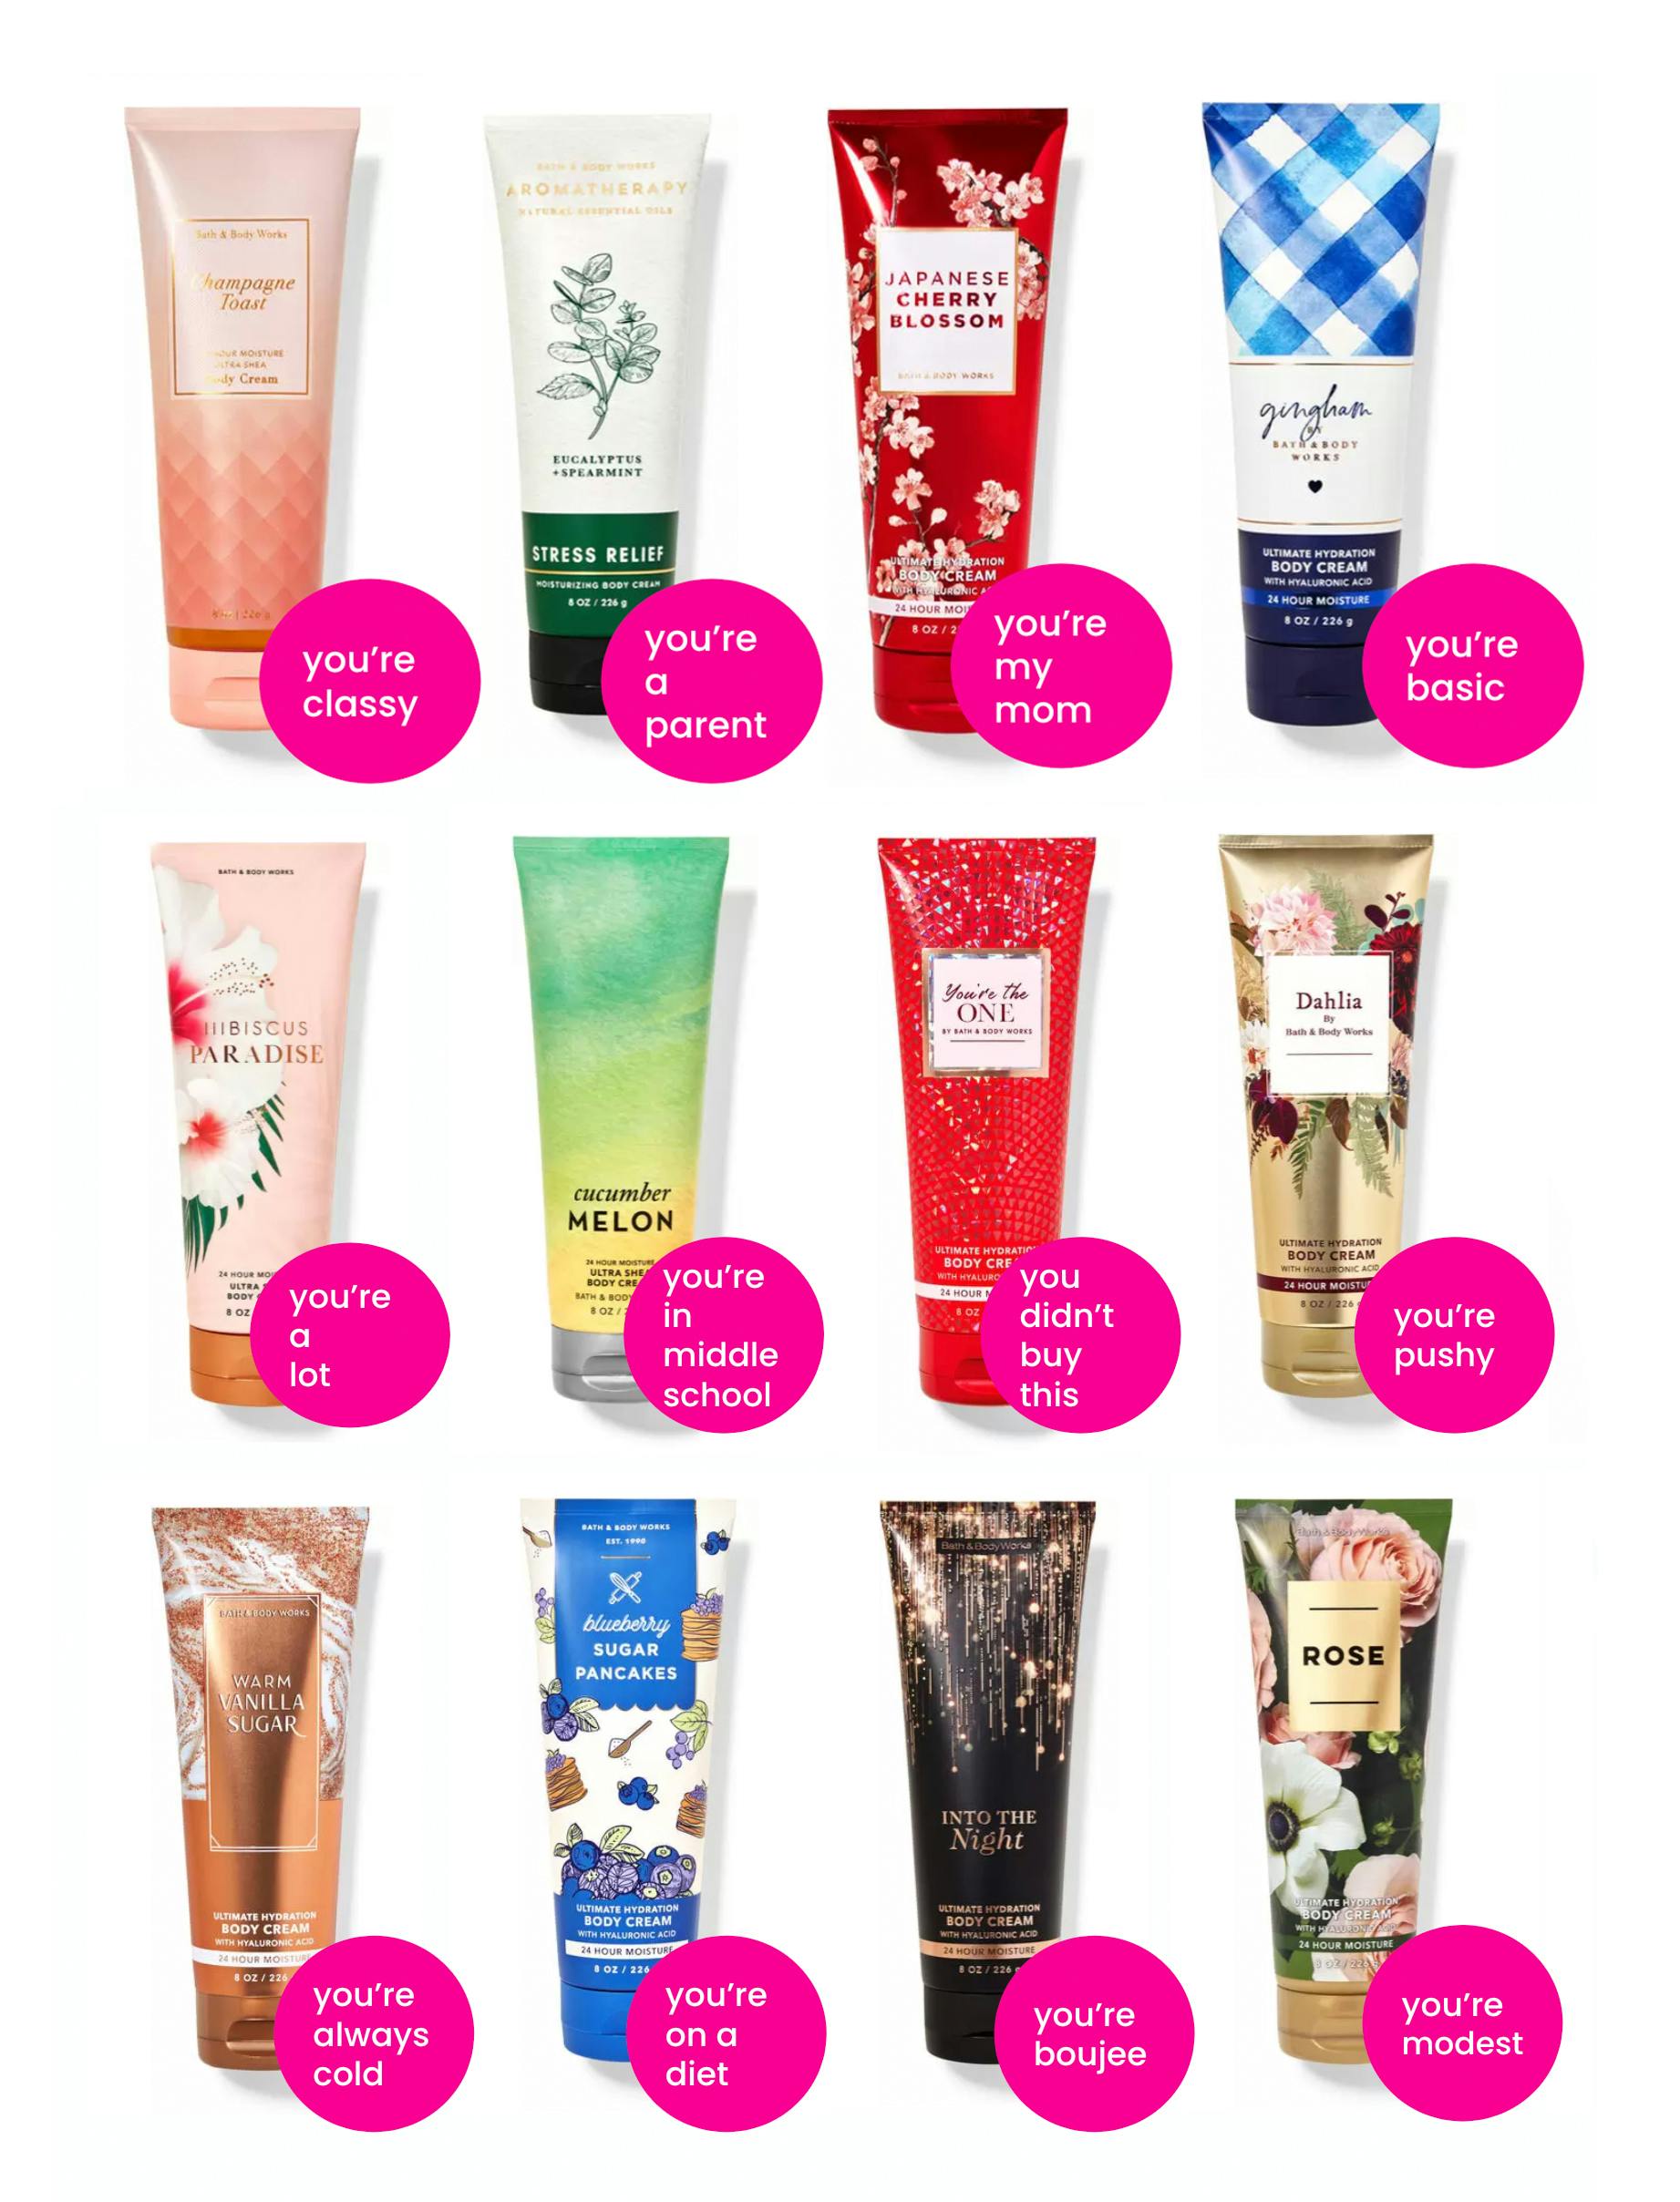 Bath and Body Works Sale Hacks That'll Blow Your Mind & Save You Big! - The  Krazy Coupon Lady